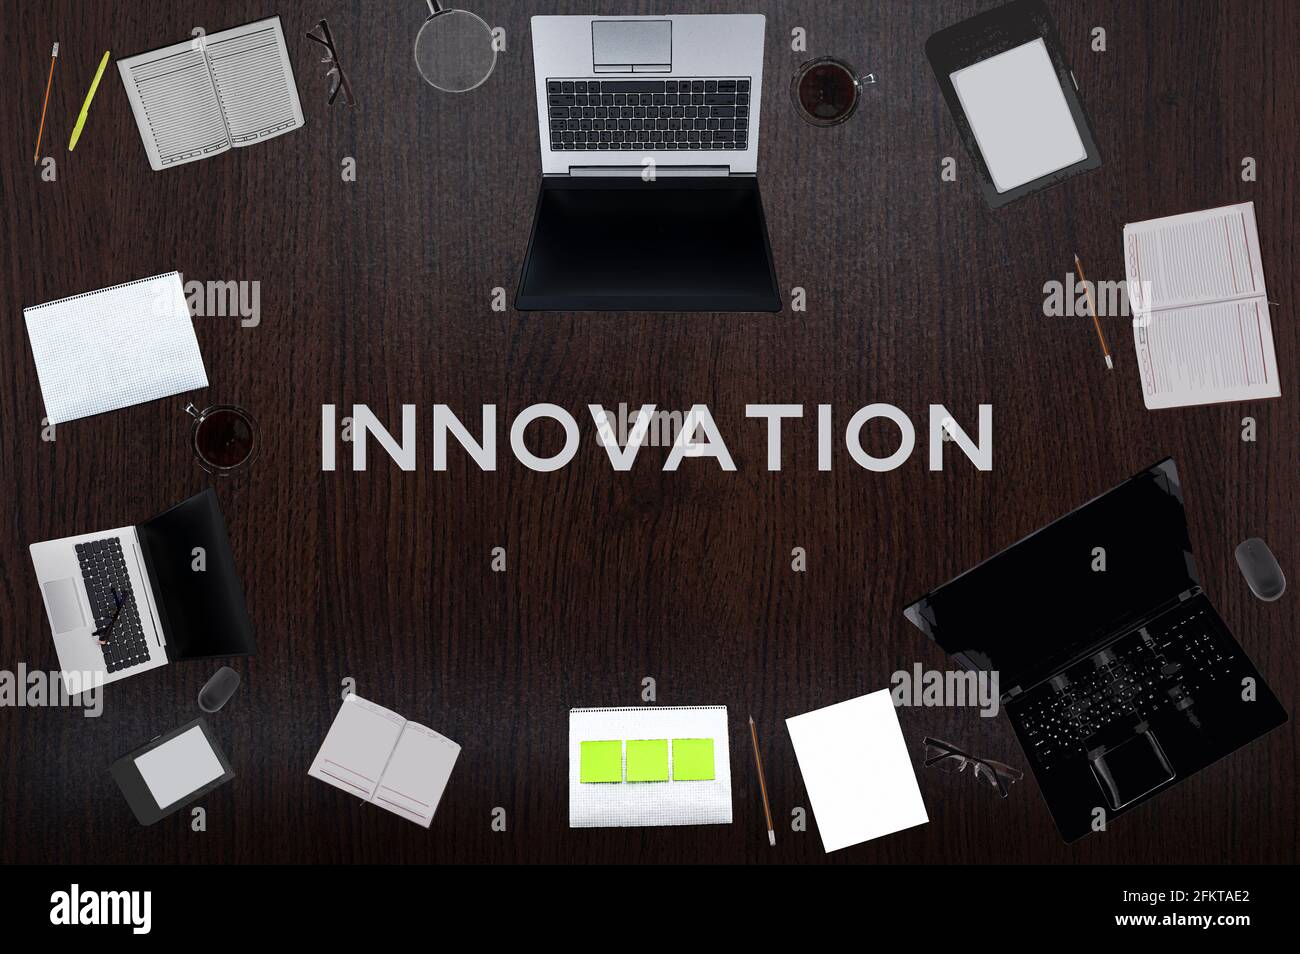 Innovation concept. Top layout of drawings of laptops, notepads, coffee, different business stuff on black background. Stock Photo